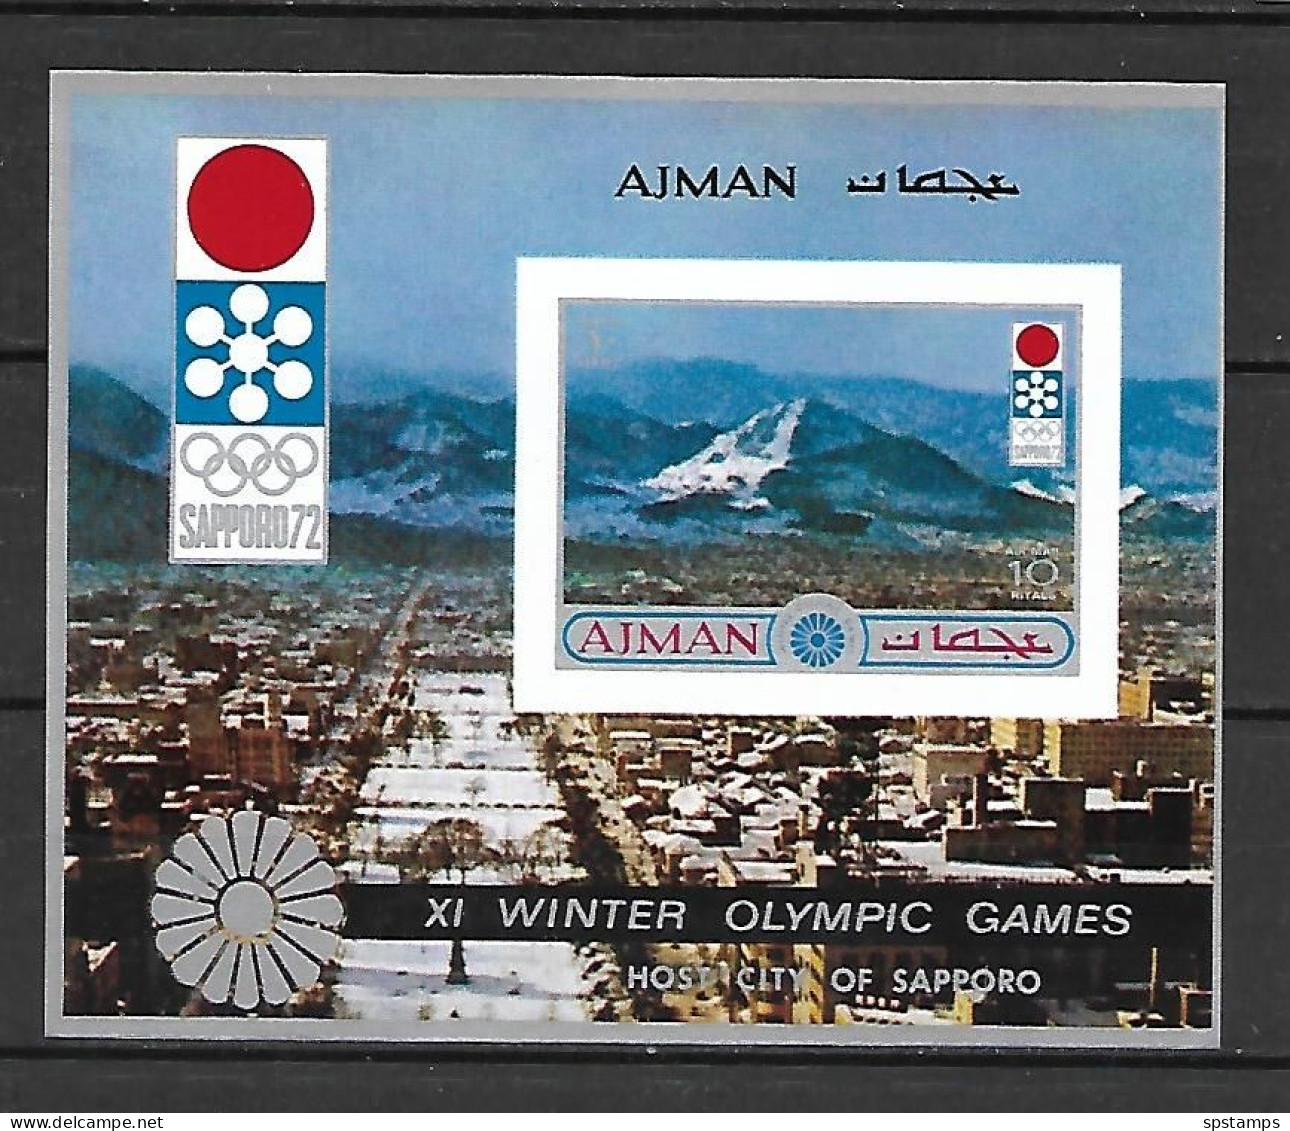 Ajman 1972 Winter Olympic Games SAPPORO IMPERFORATE MS MNH - Invierno 1972: Sapporo